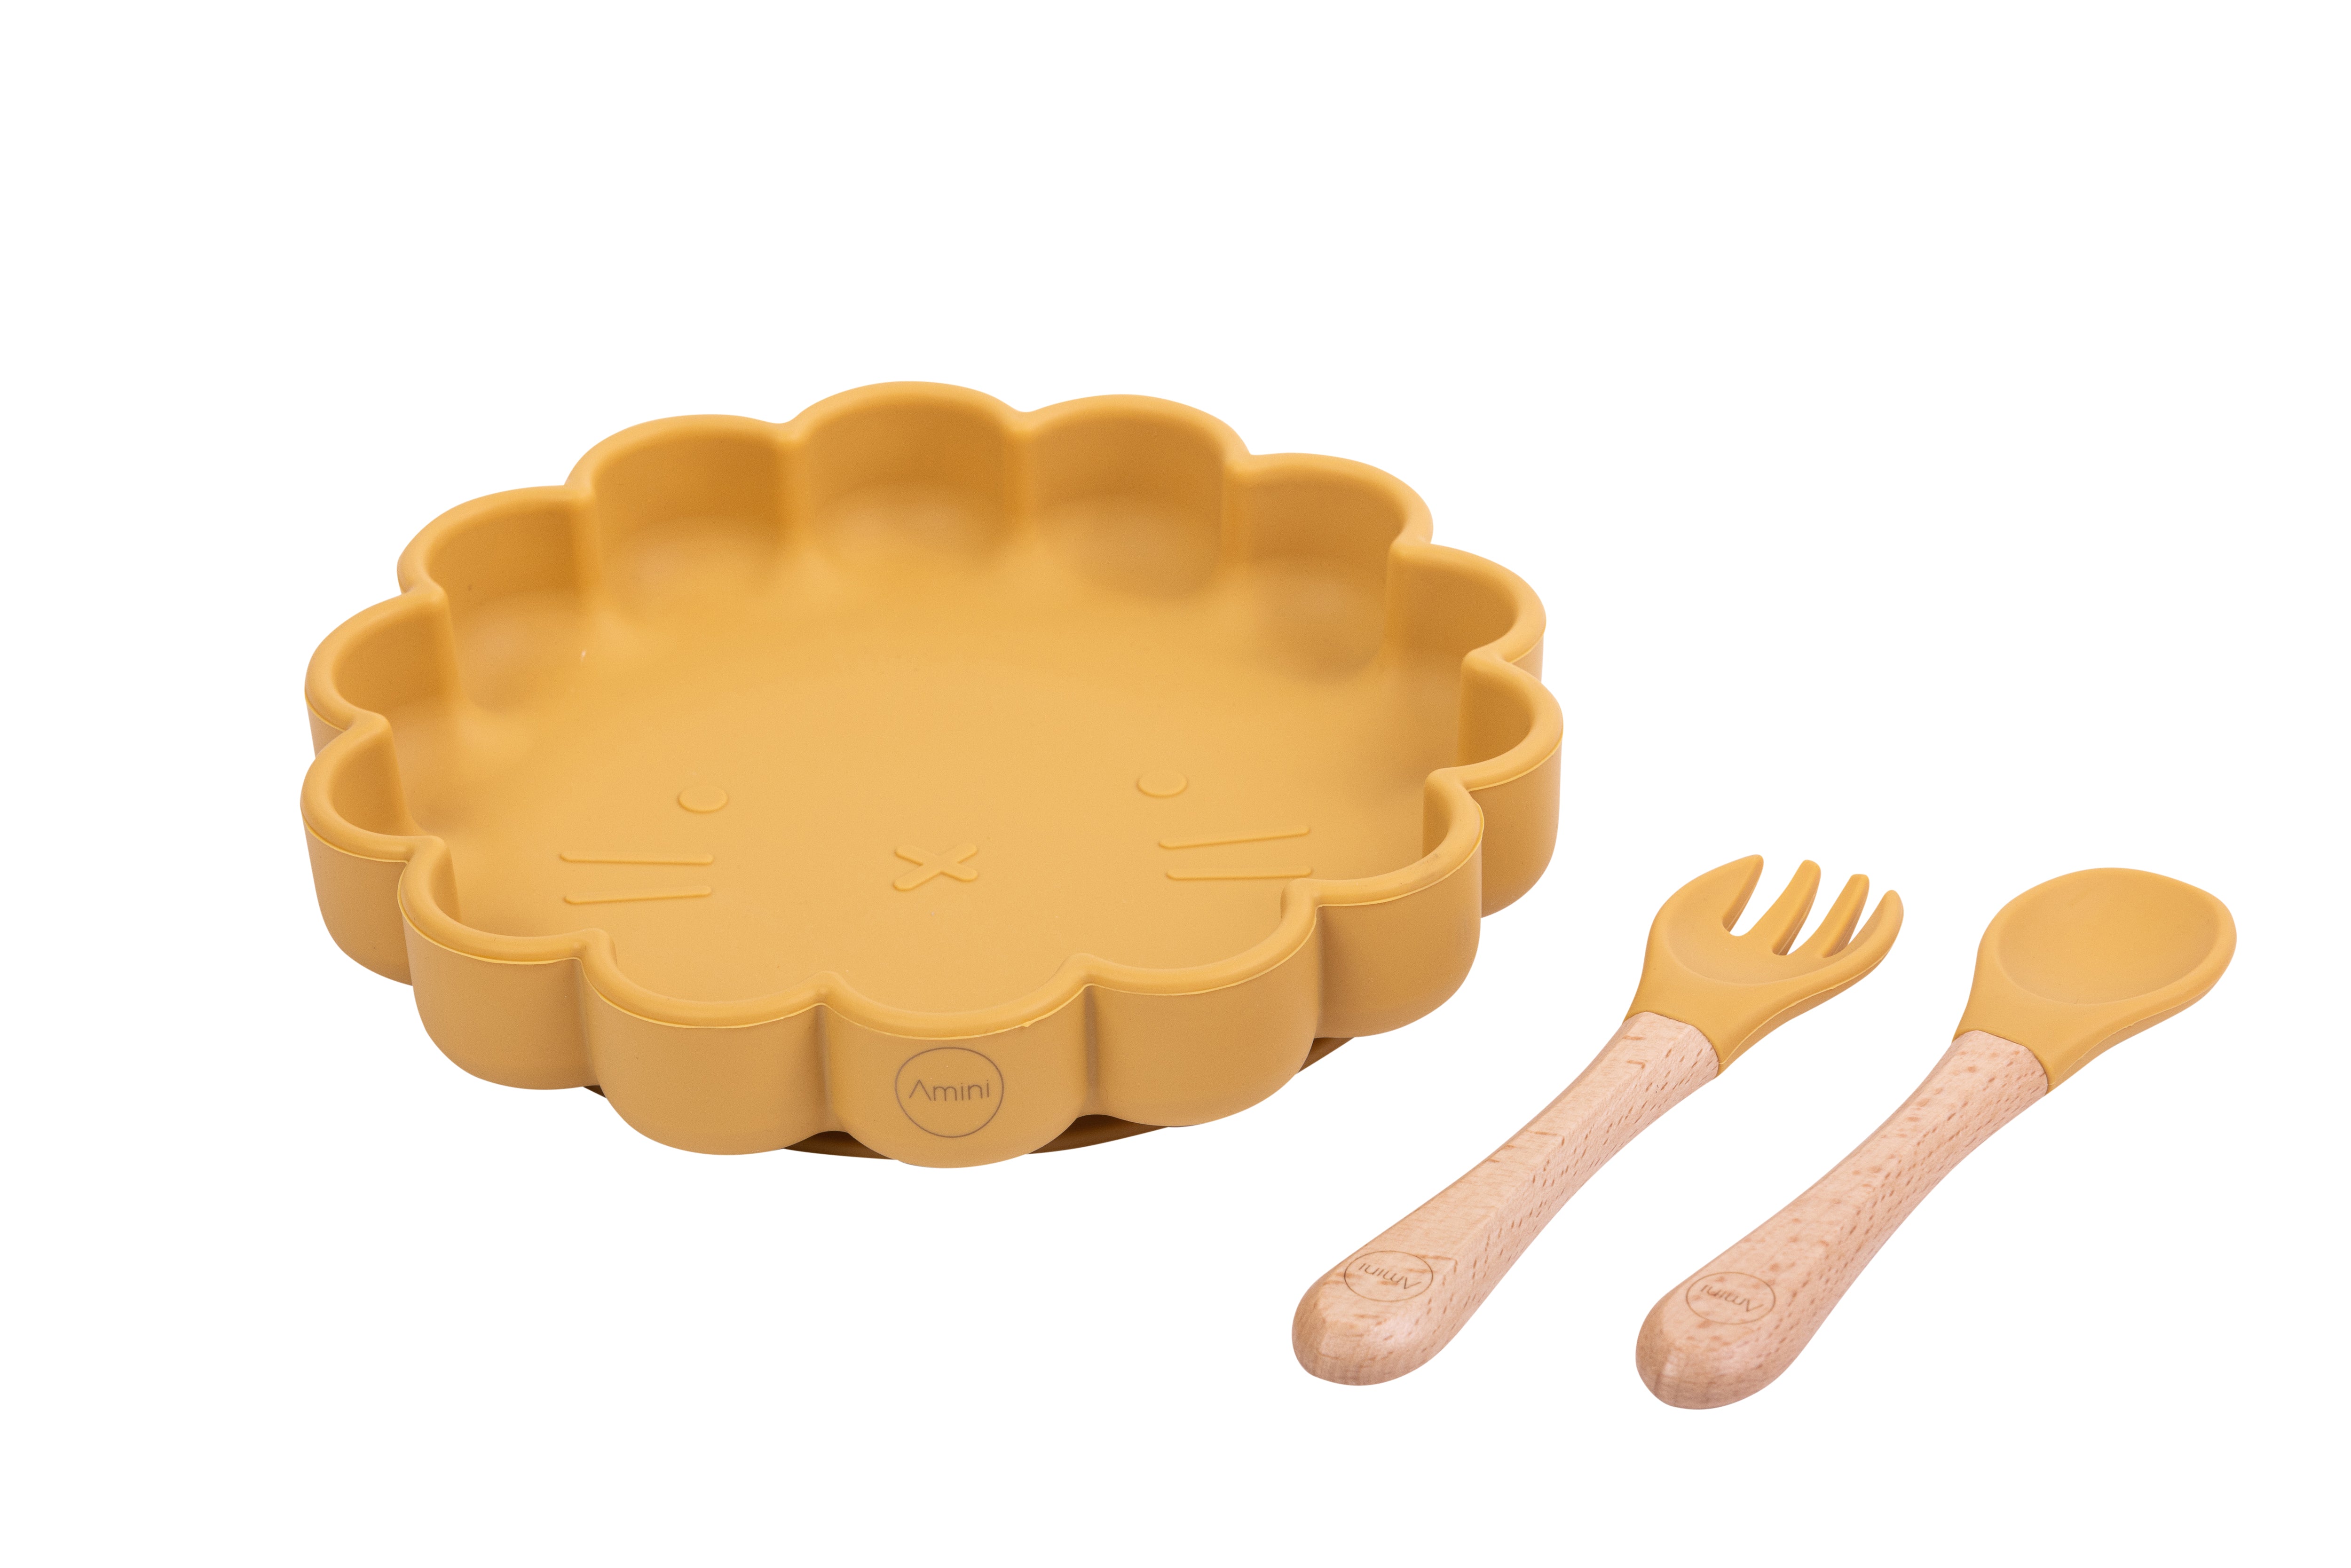 Amini kids Cat Plate with Silicon/Bamboo Spoon and Fork